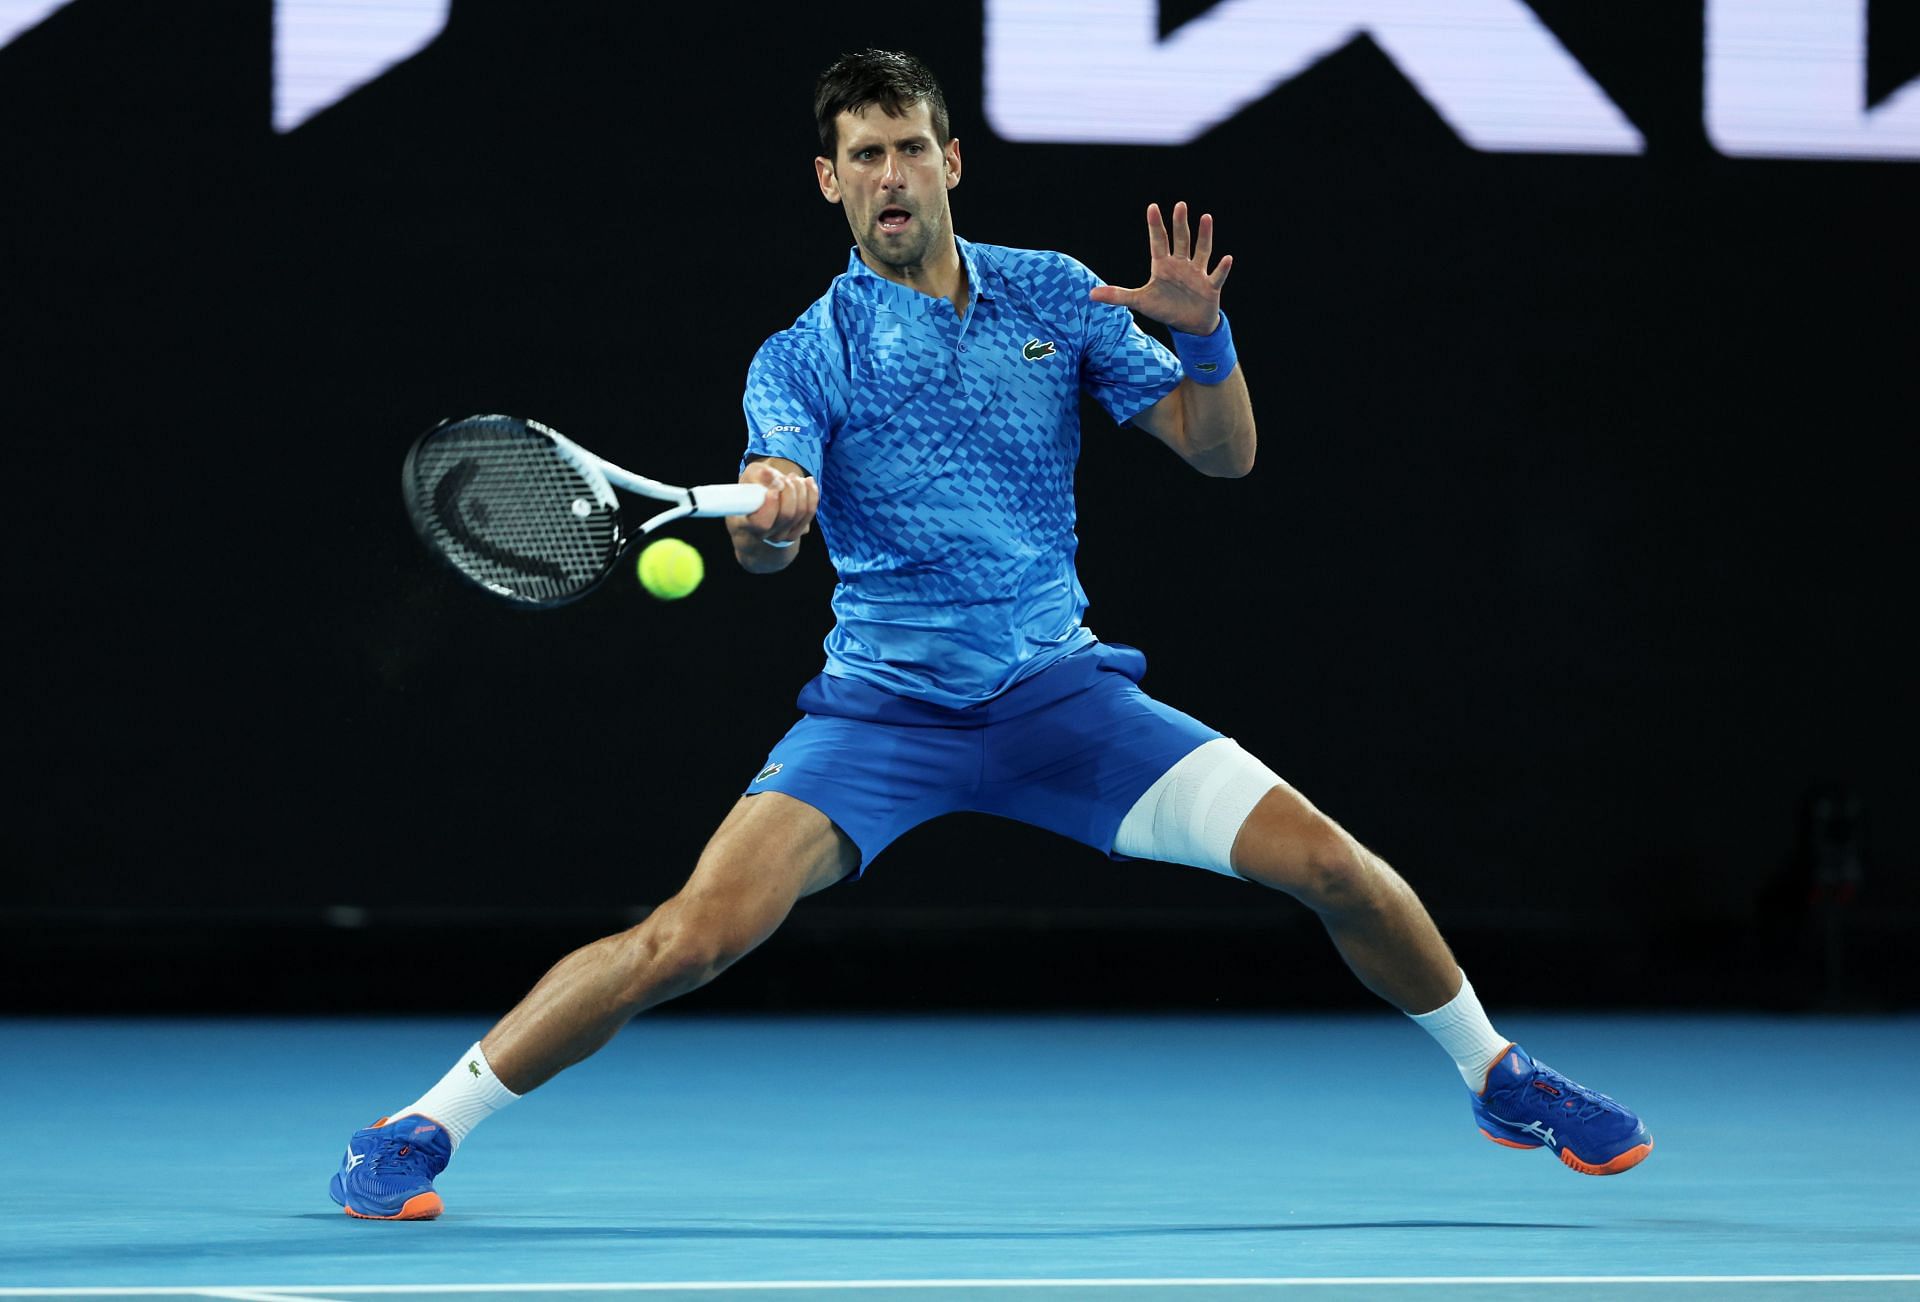 Novak plays a forehand against Roberto Carballes Baena